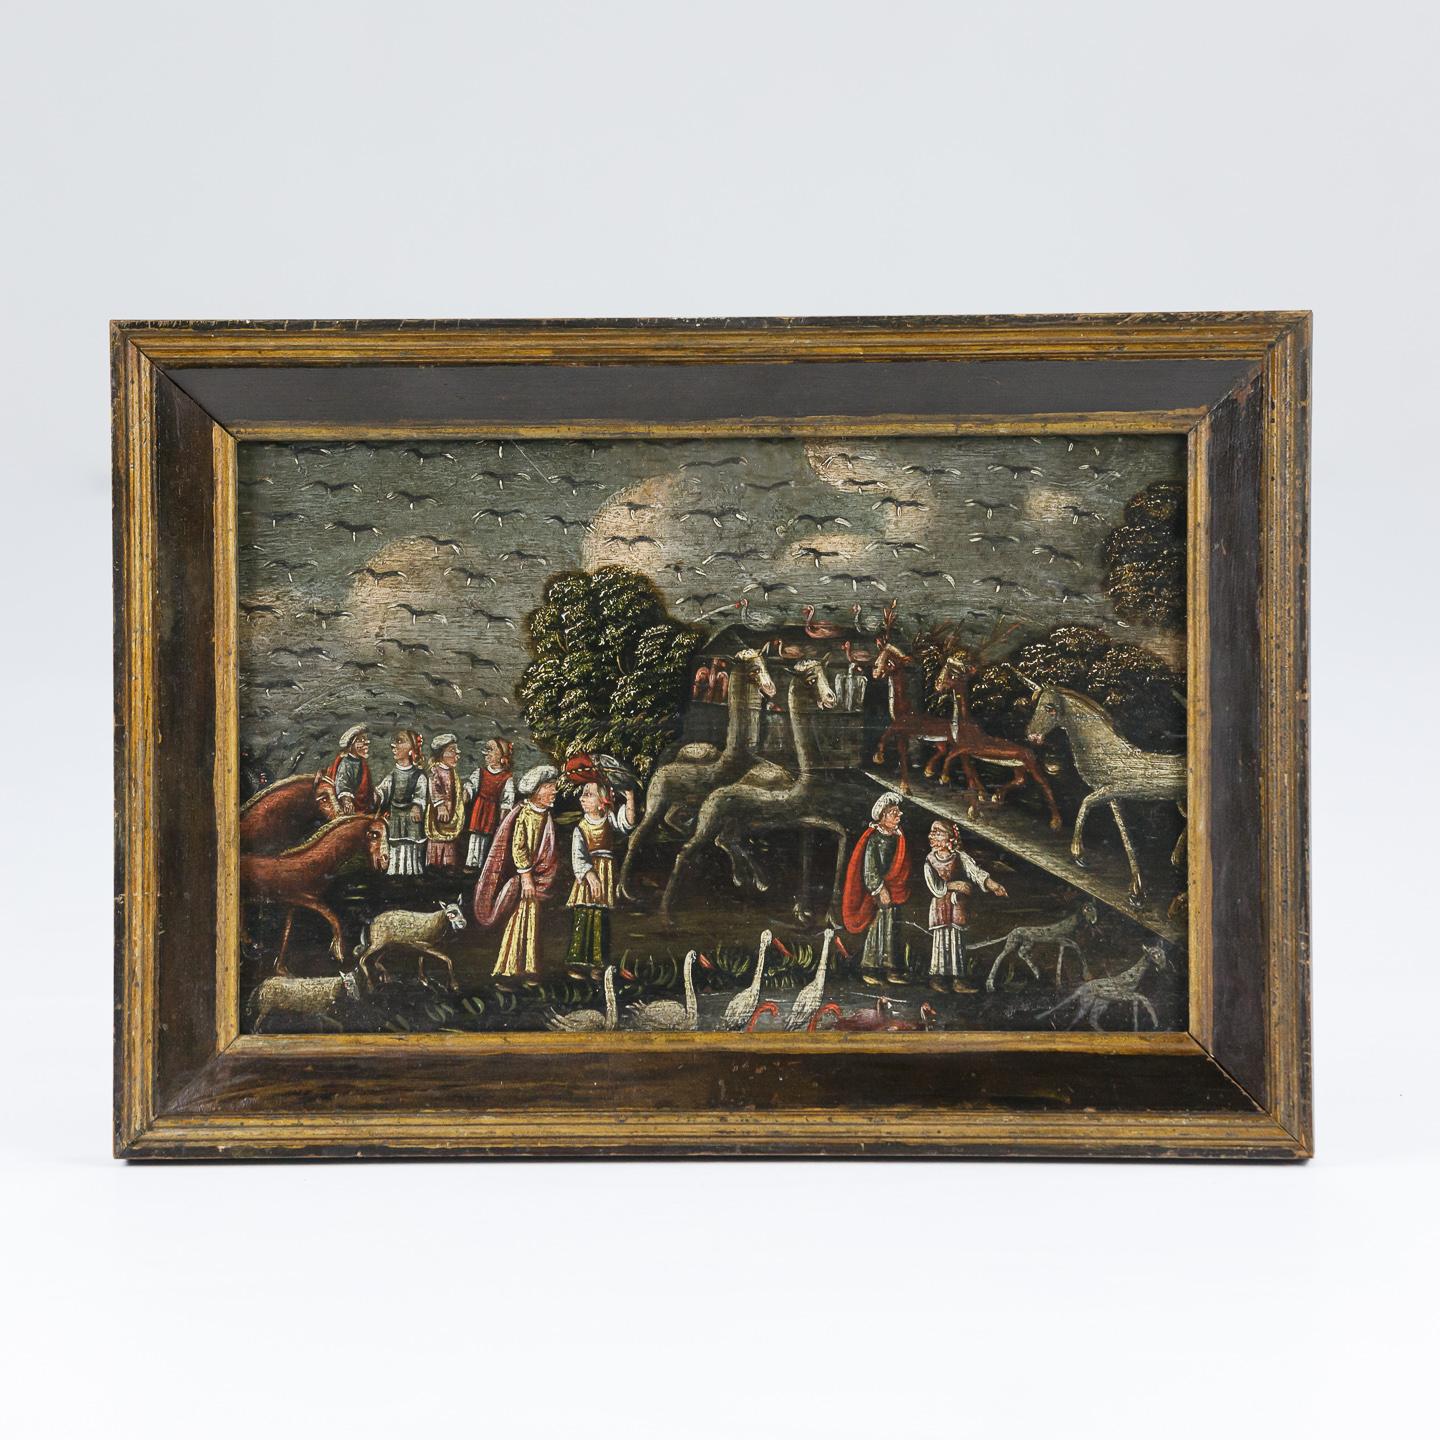 19th century primitive oil on panel depicting Noahs Ark, original frame.
Wonderfully eccentric feel of the masses of animals boarding the Ark, Including a Unicorn!
Recently cleaned and restored
France, circa 1850.